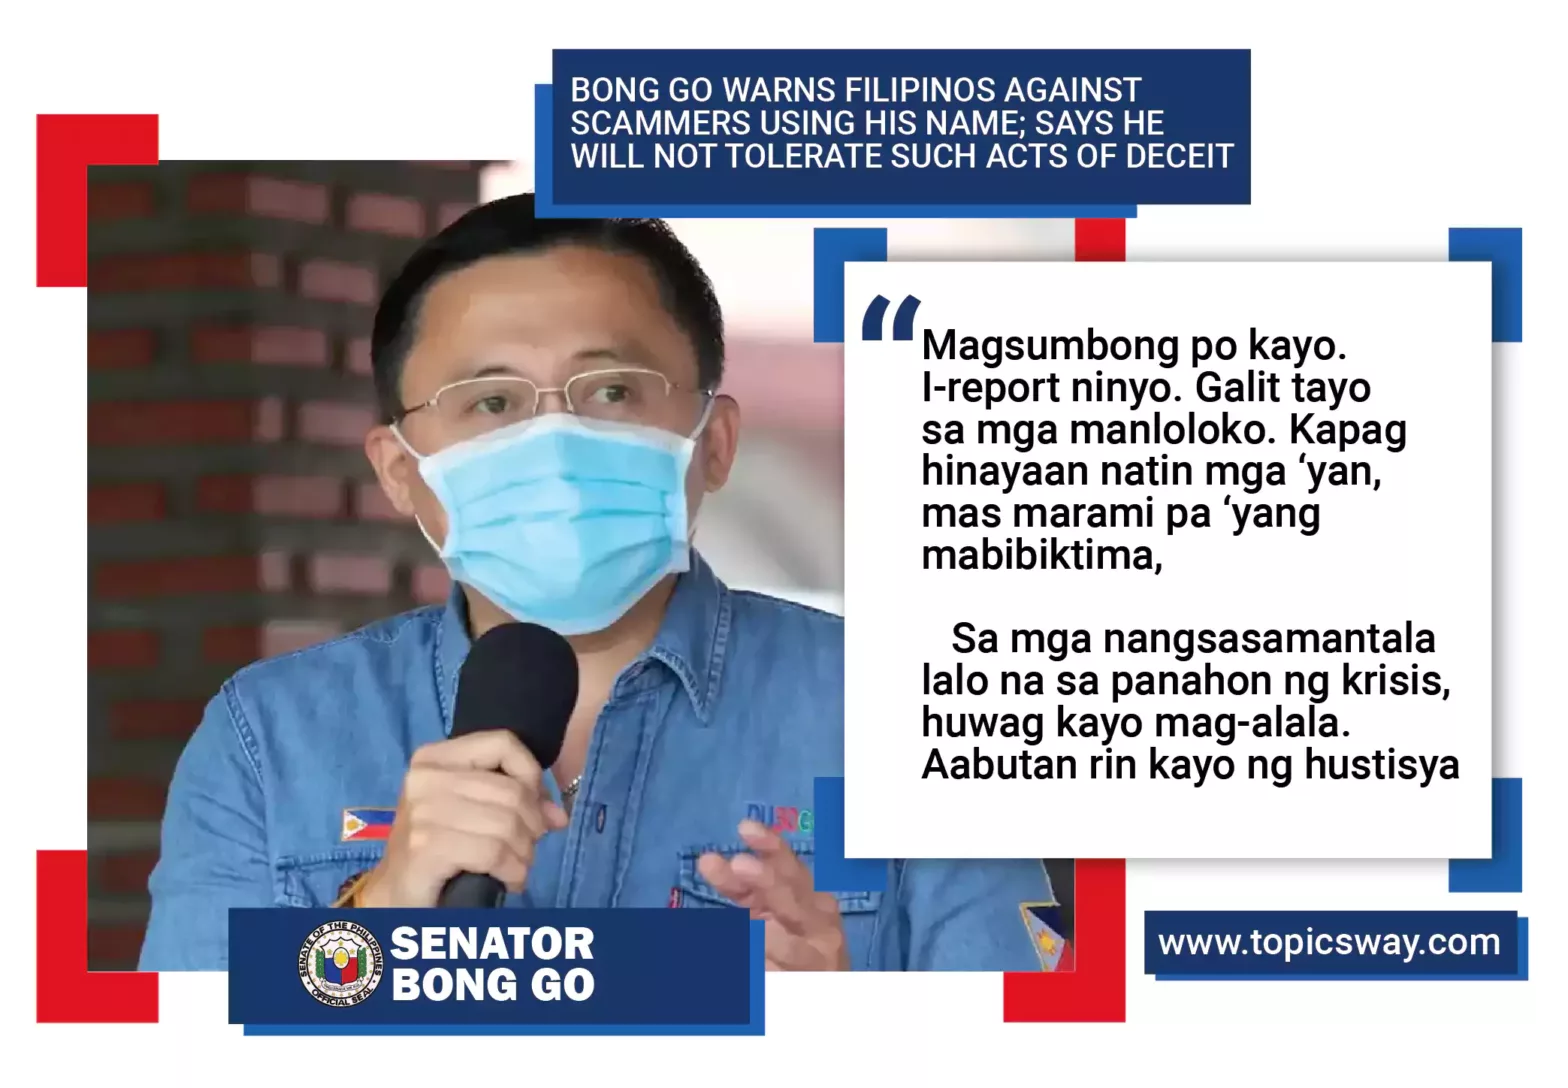 BONG GO WARNS FILIPINOS AGAINST SCAMMERS USING HIS NAME; SAYS HE WILL NOT TOLERATE SUCH ACTS OF DECEIT